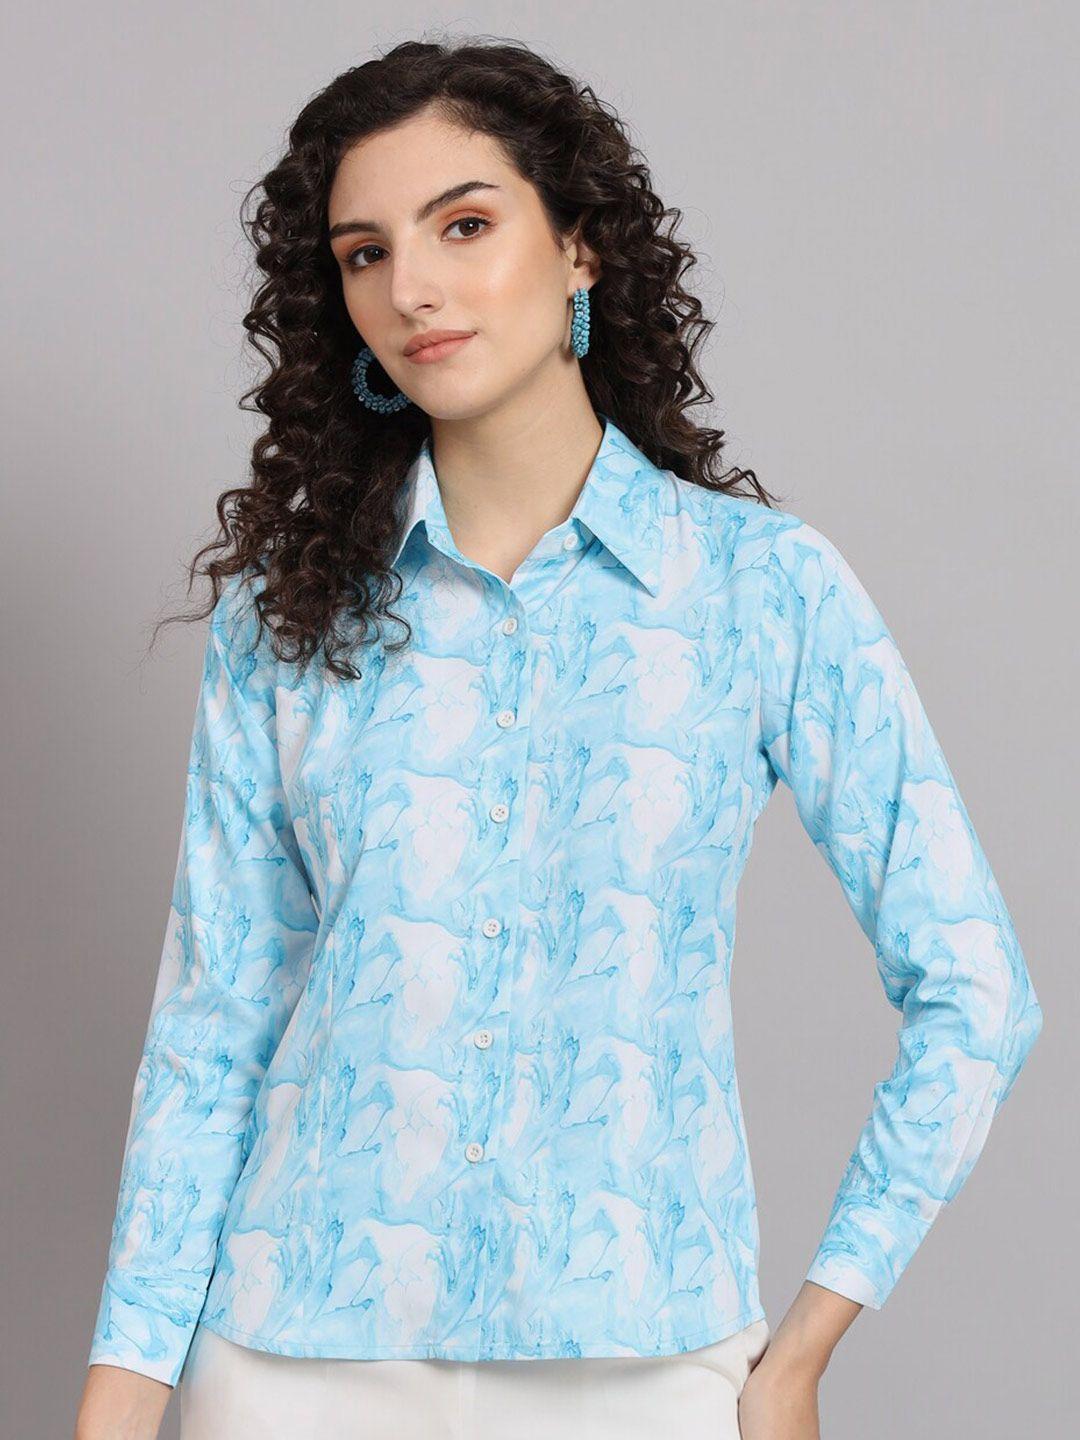 powersutra comfort abstract printed casual shirt